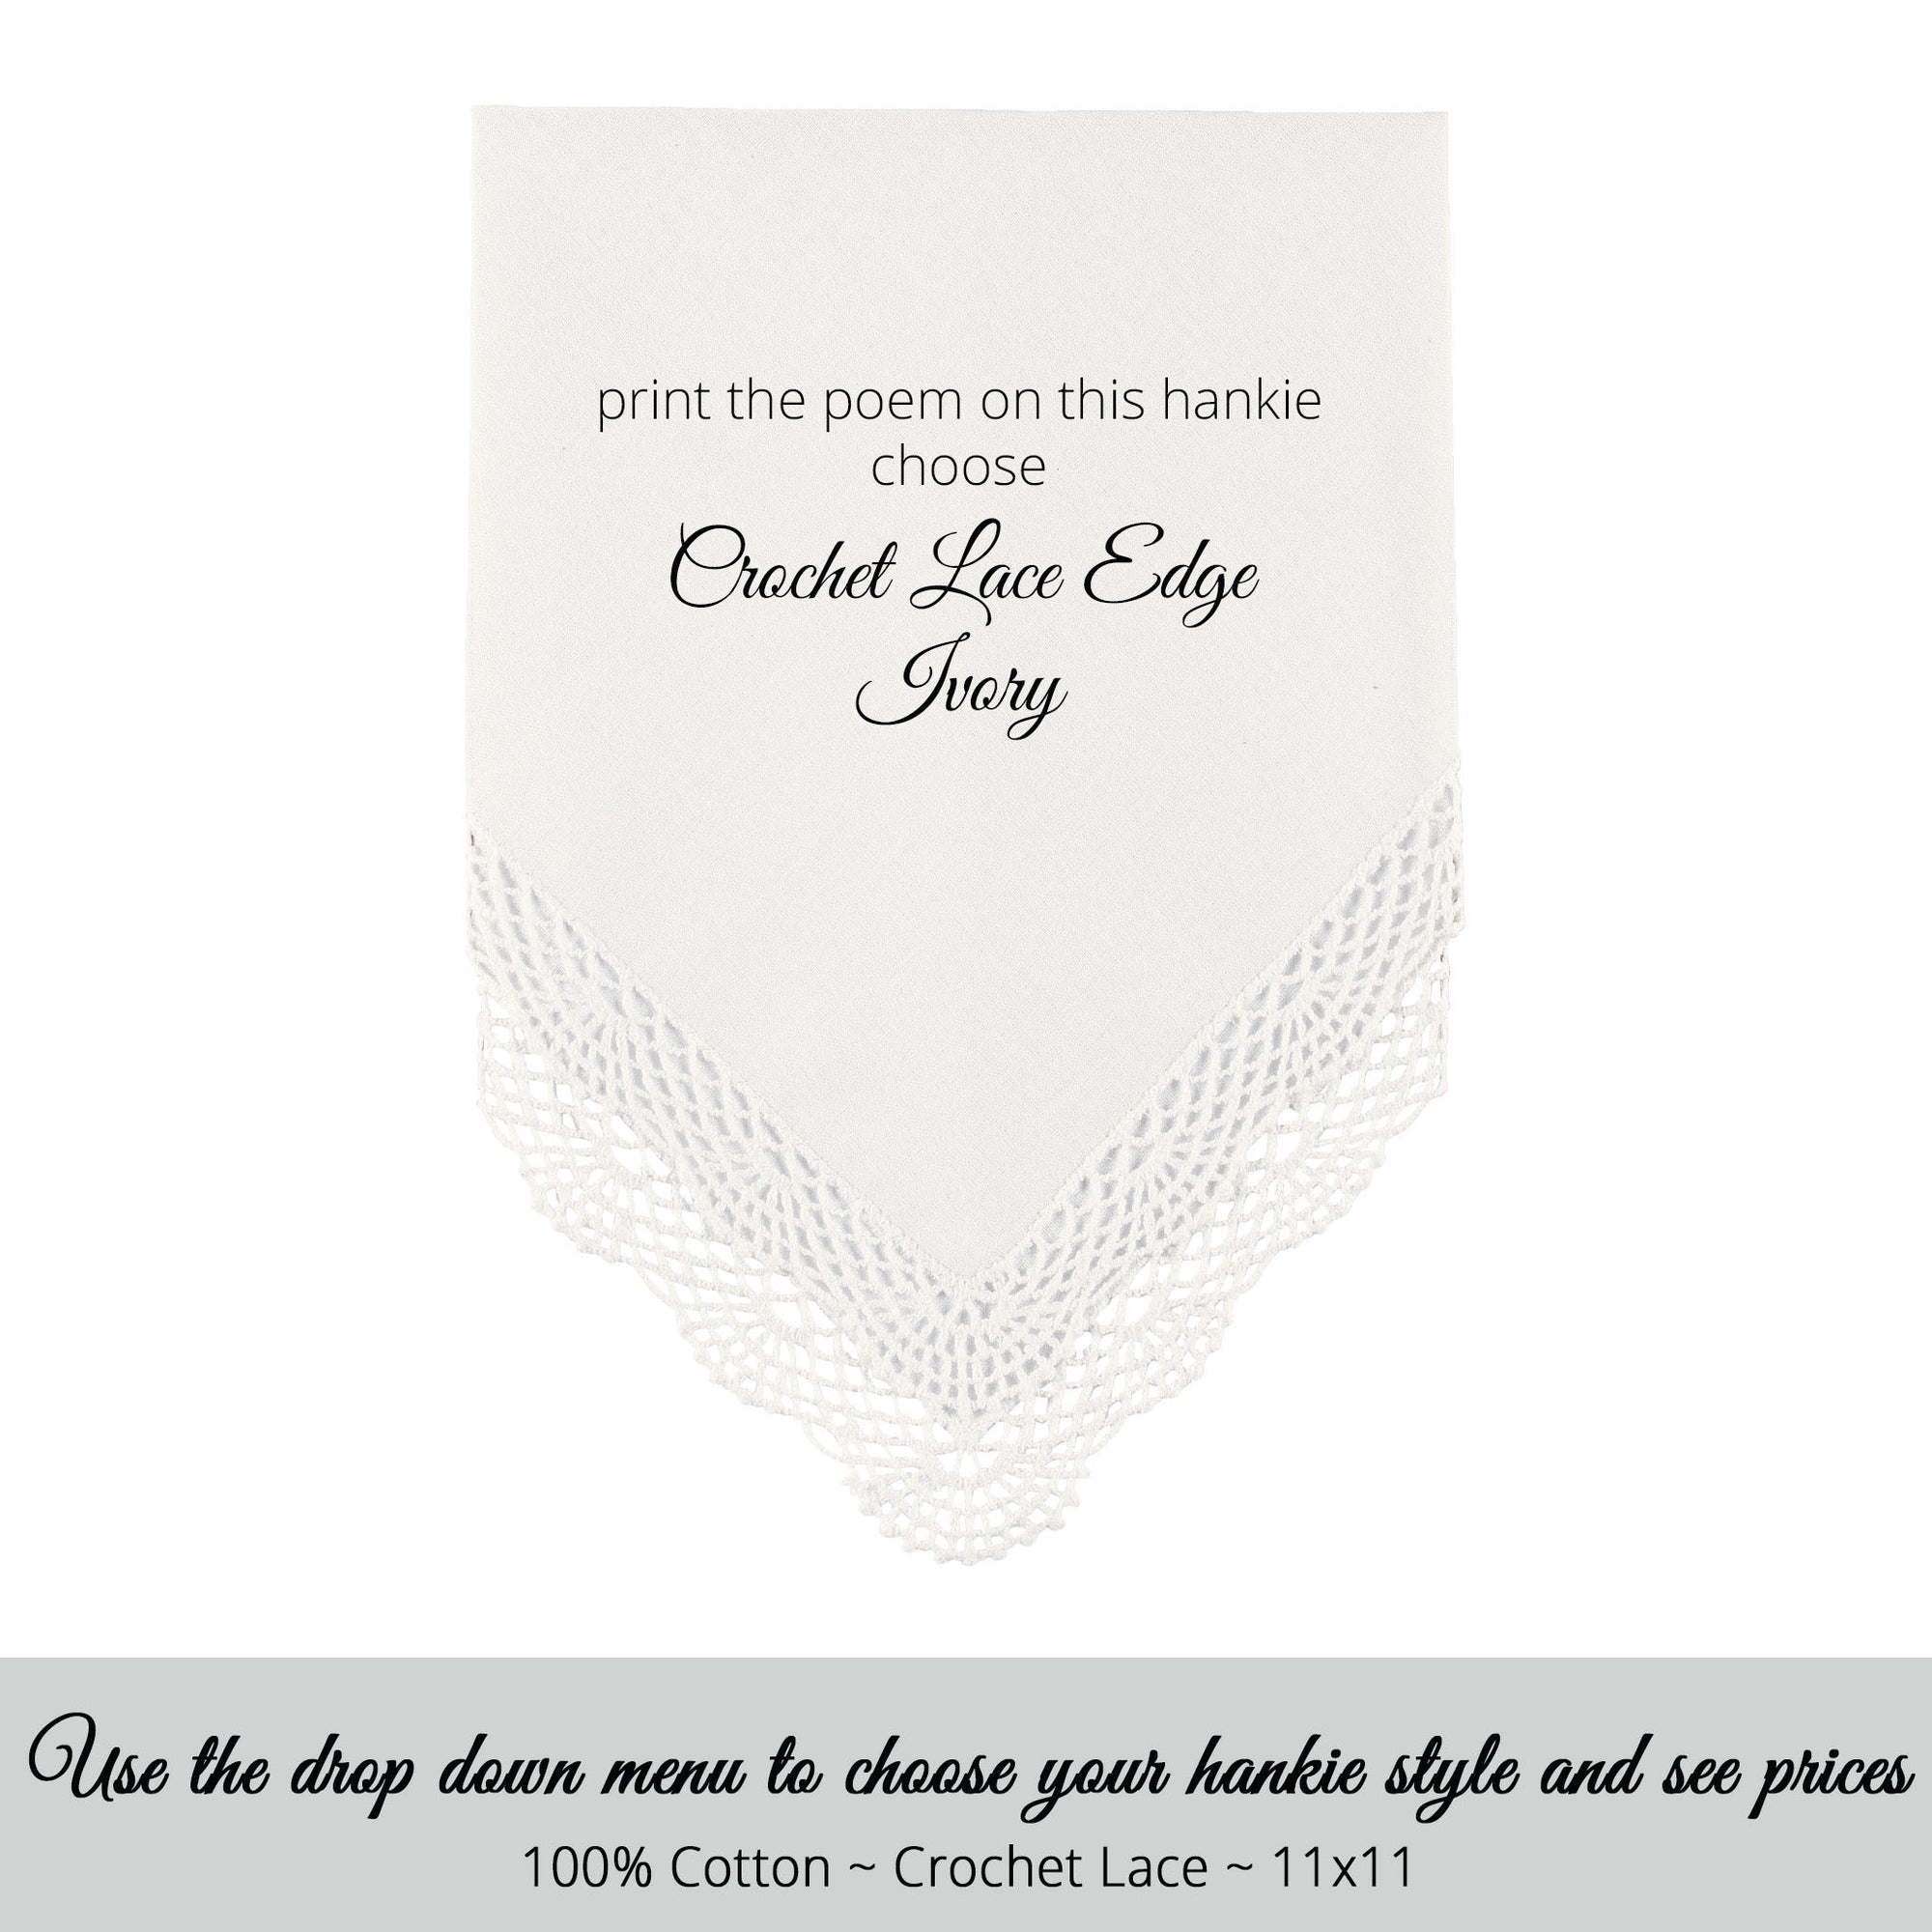 Wedding handkerchief ivory with crochet lace edge for the bride poem printed hankie